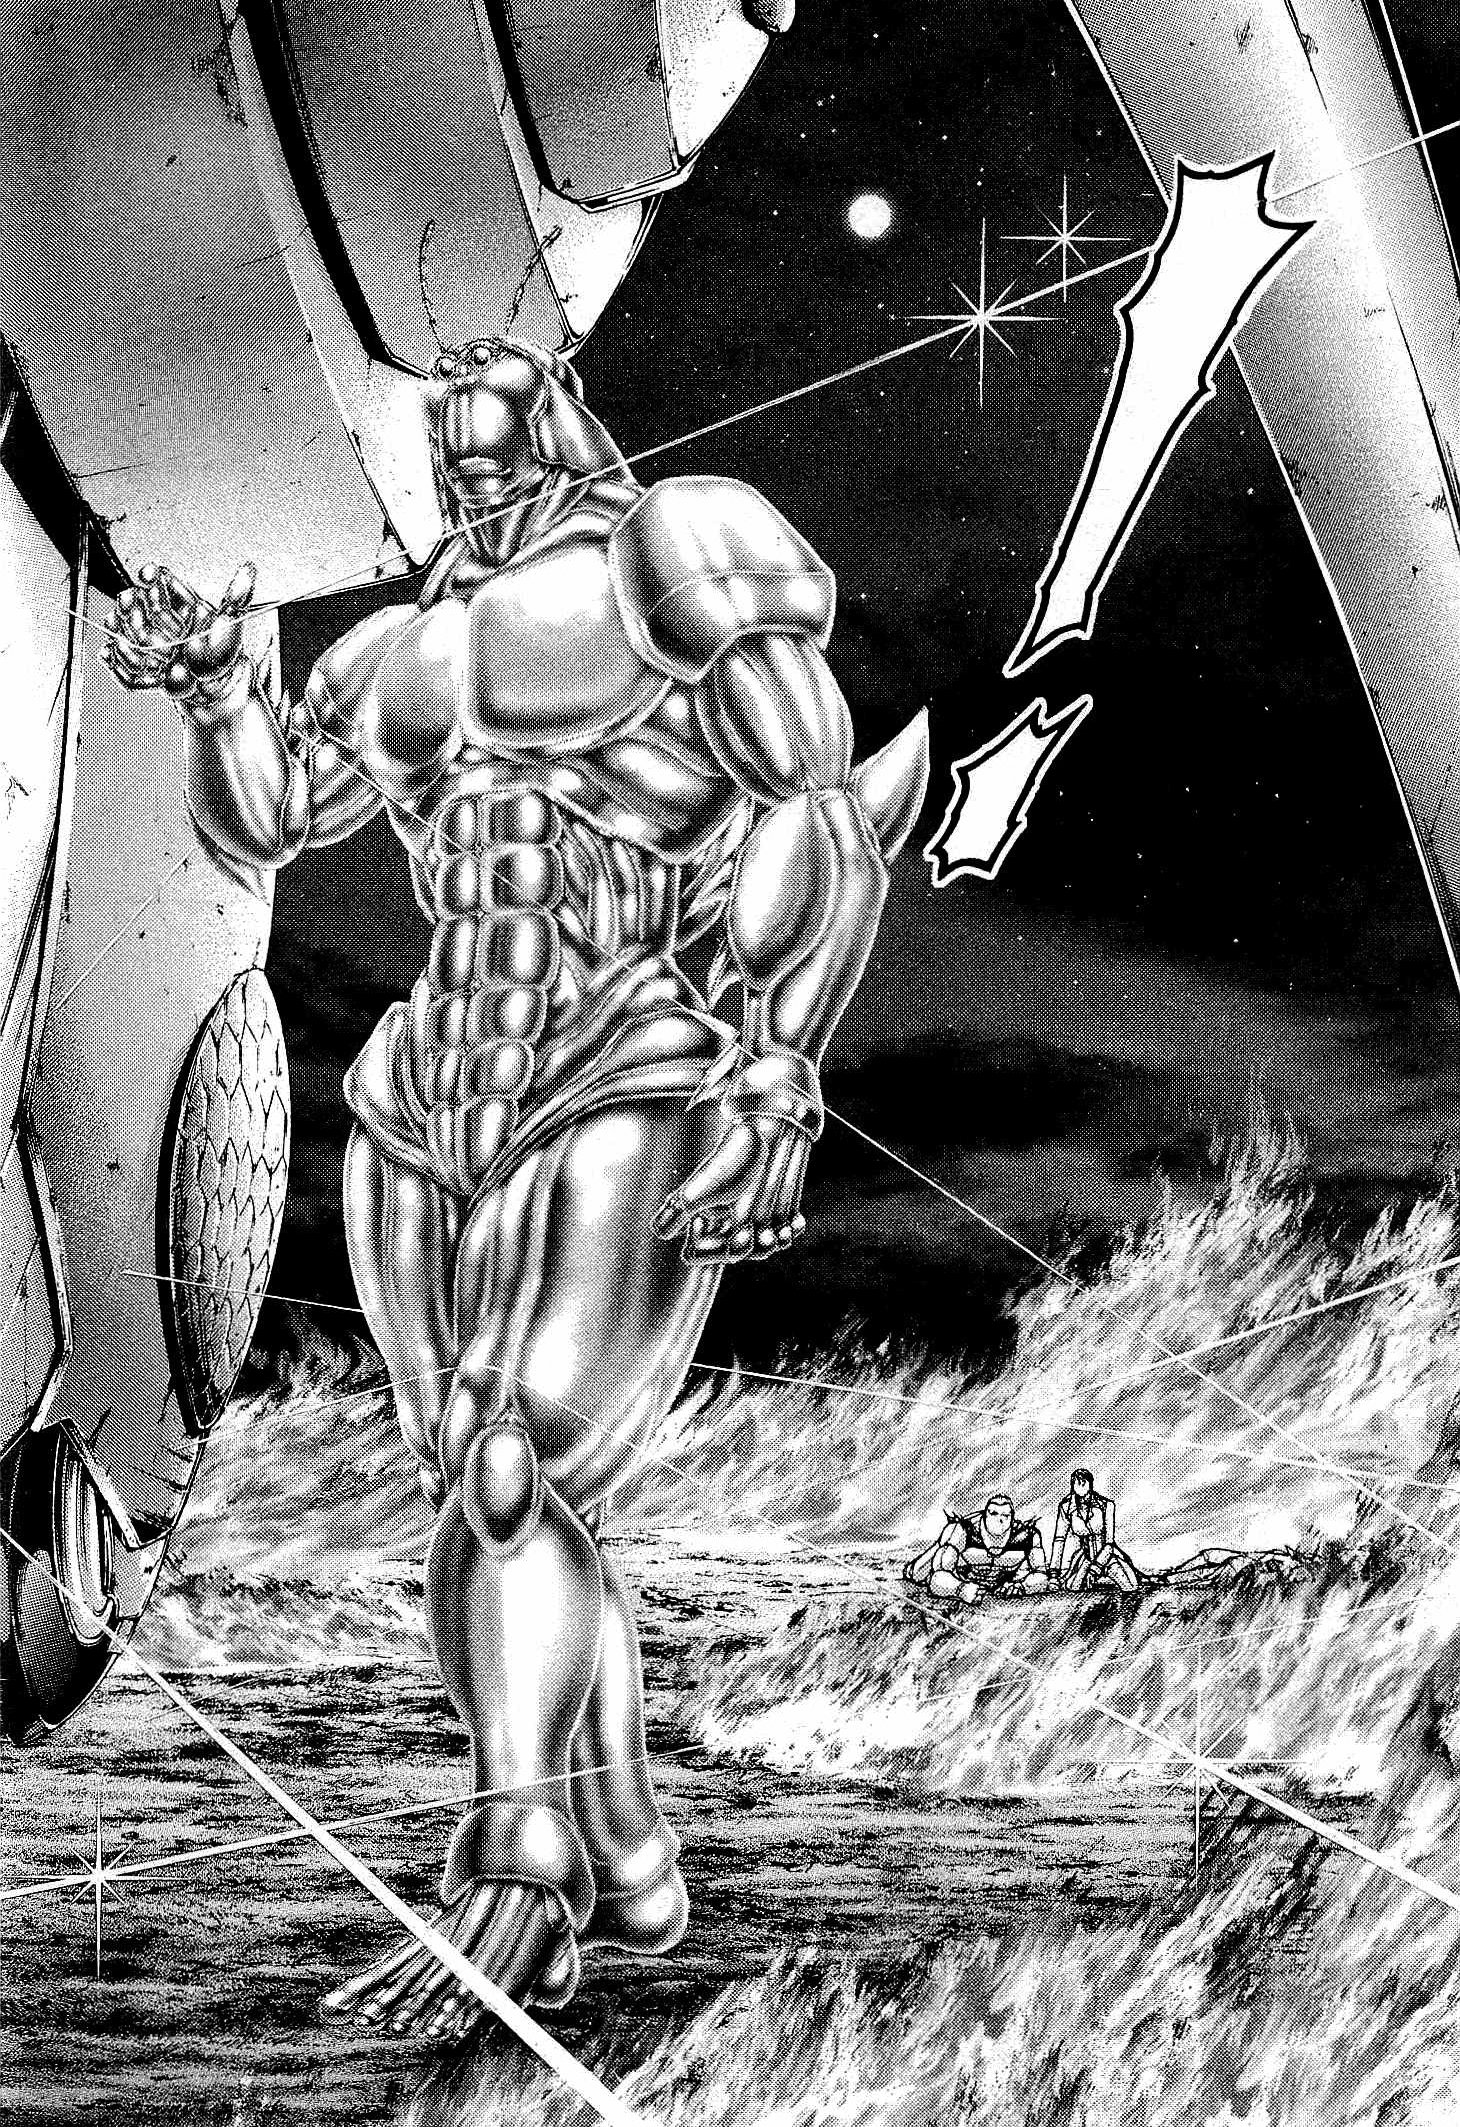 Terra Formars is an Obscenely Racist Manga and Anime Series… and it's Sort  of Hilarious | The Kenpire